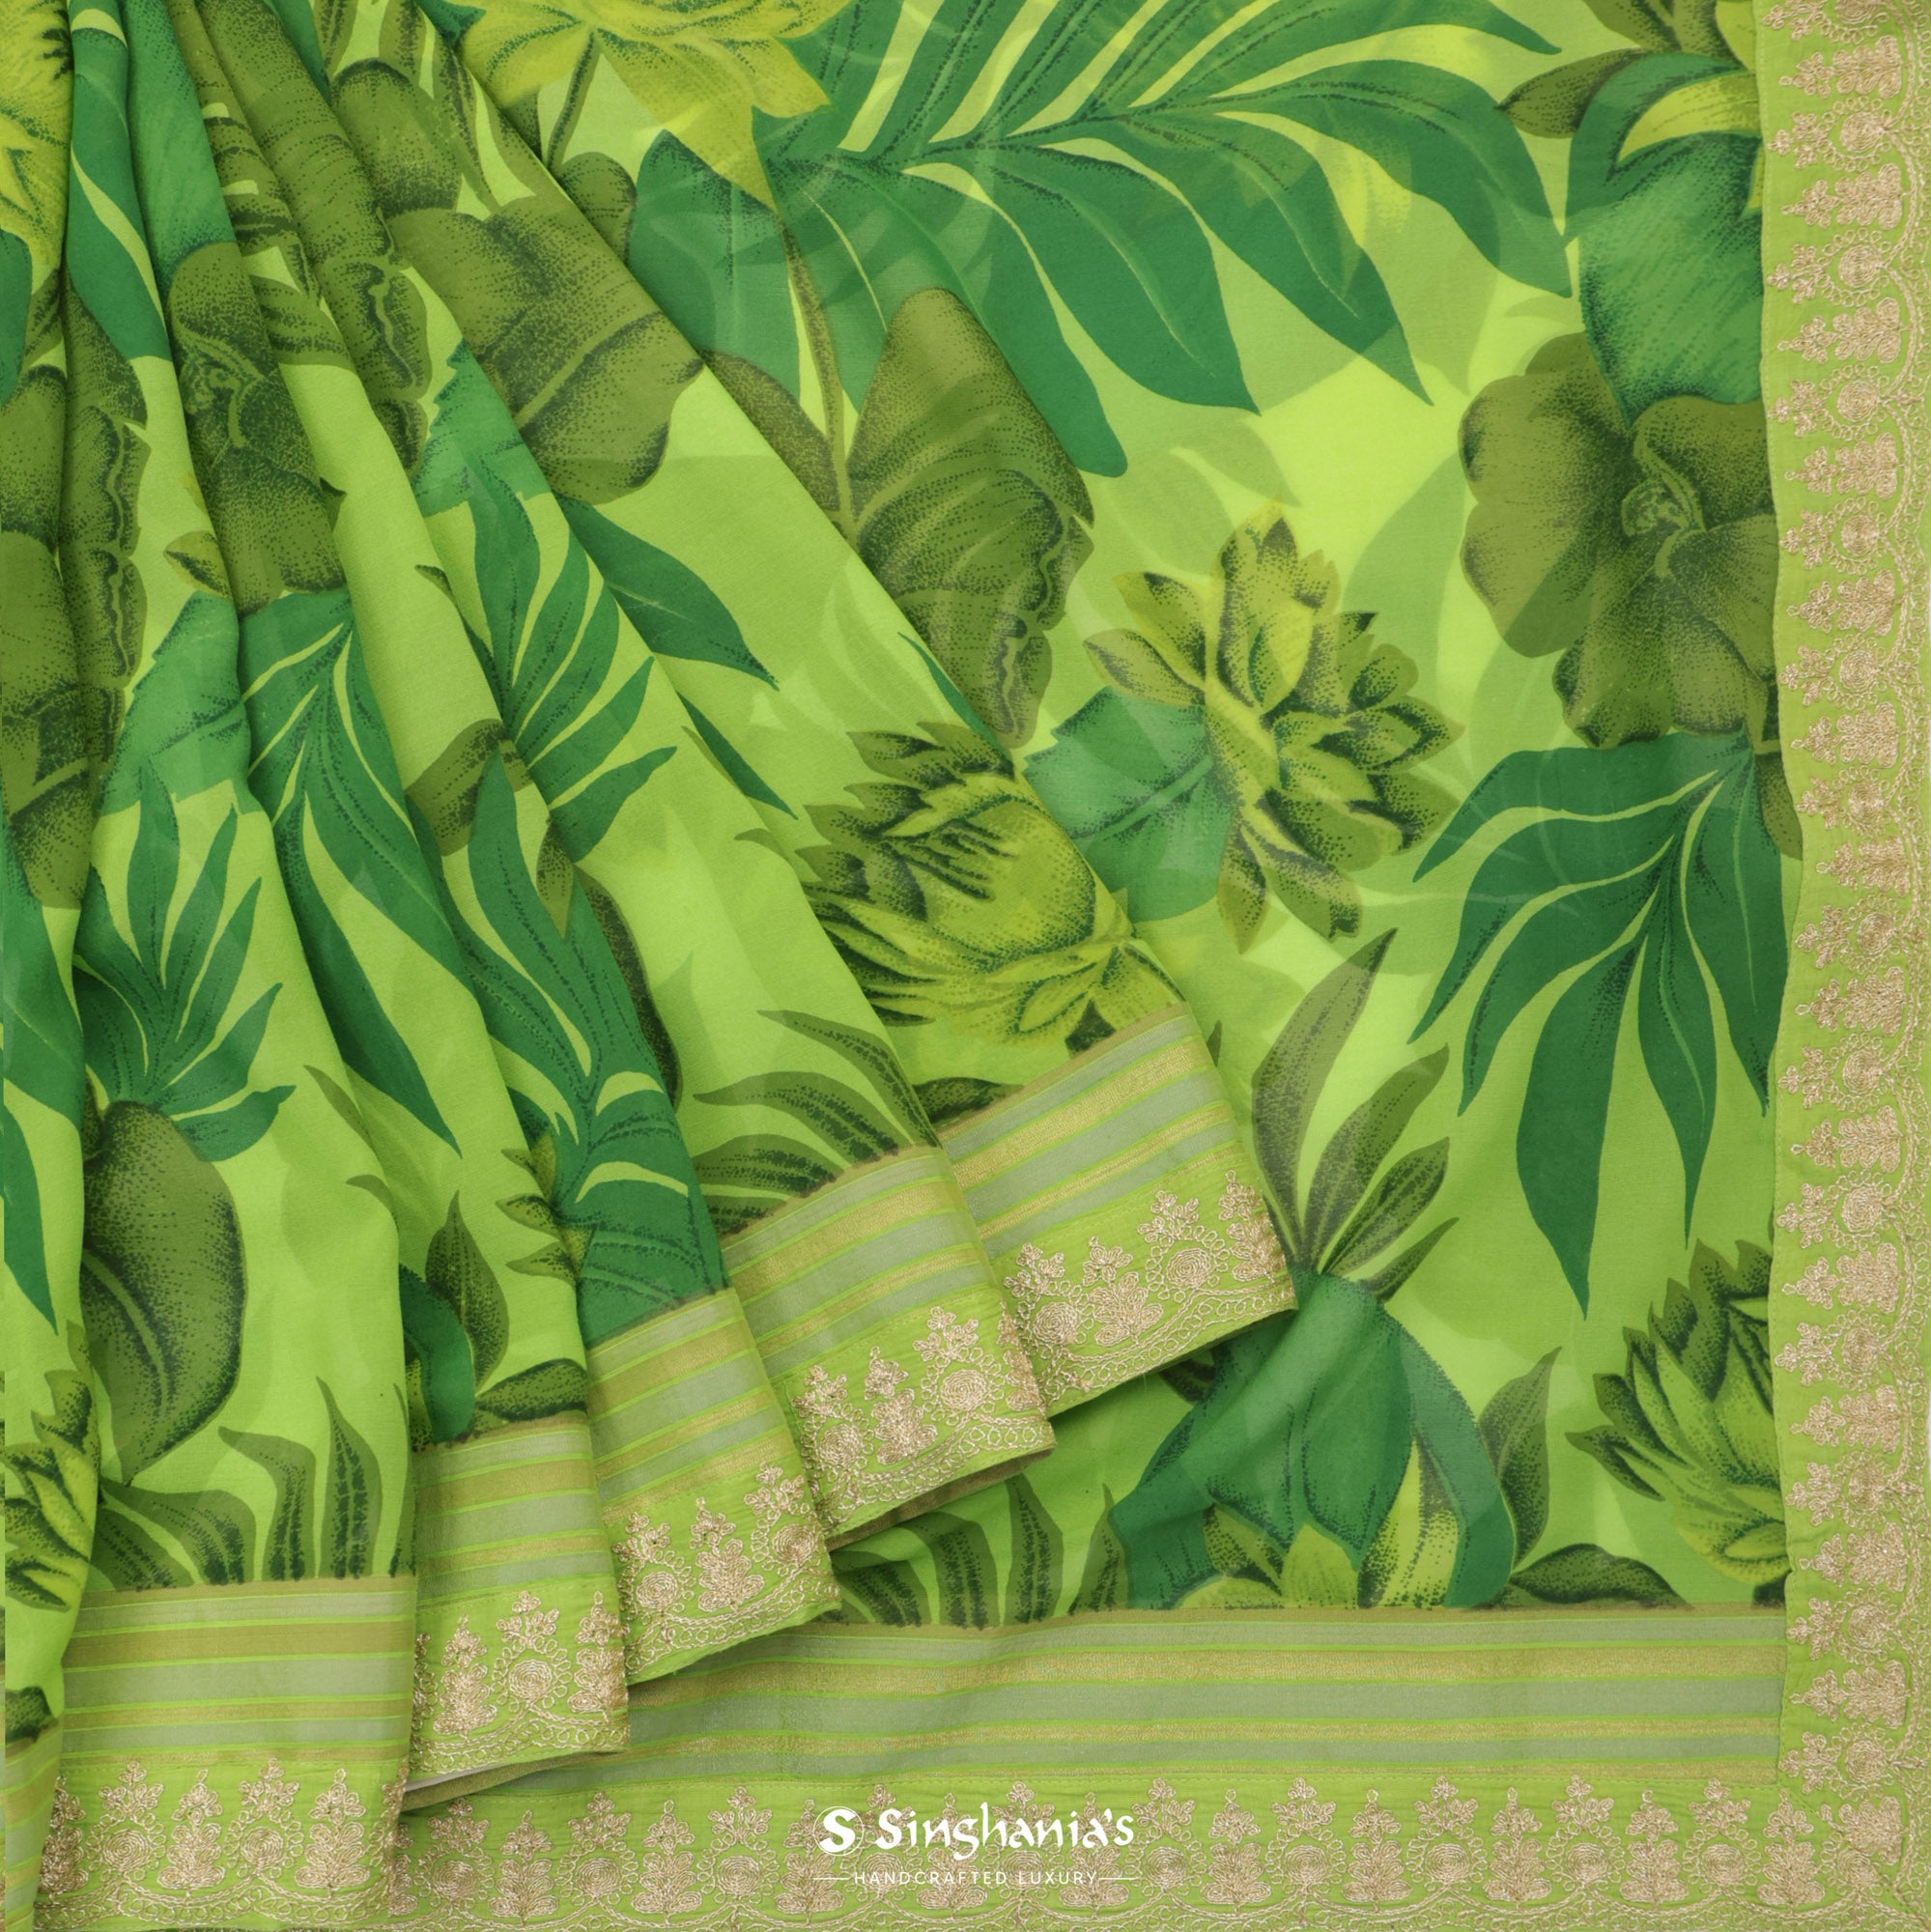 Lime Green Georgette Saree With Printed Floral Pattern